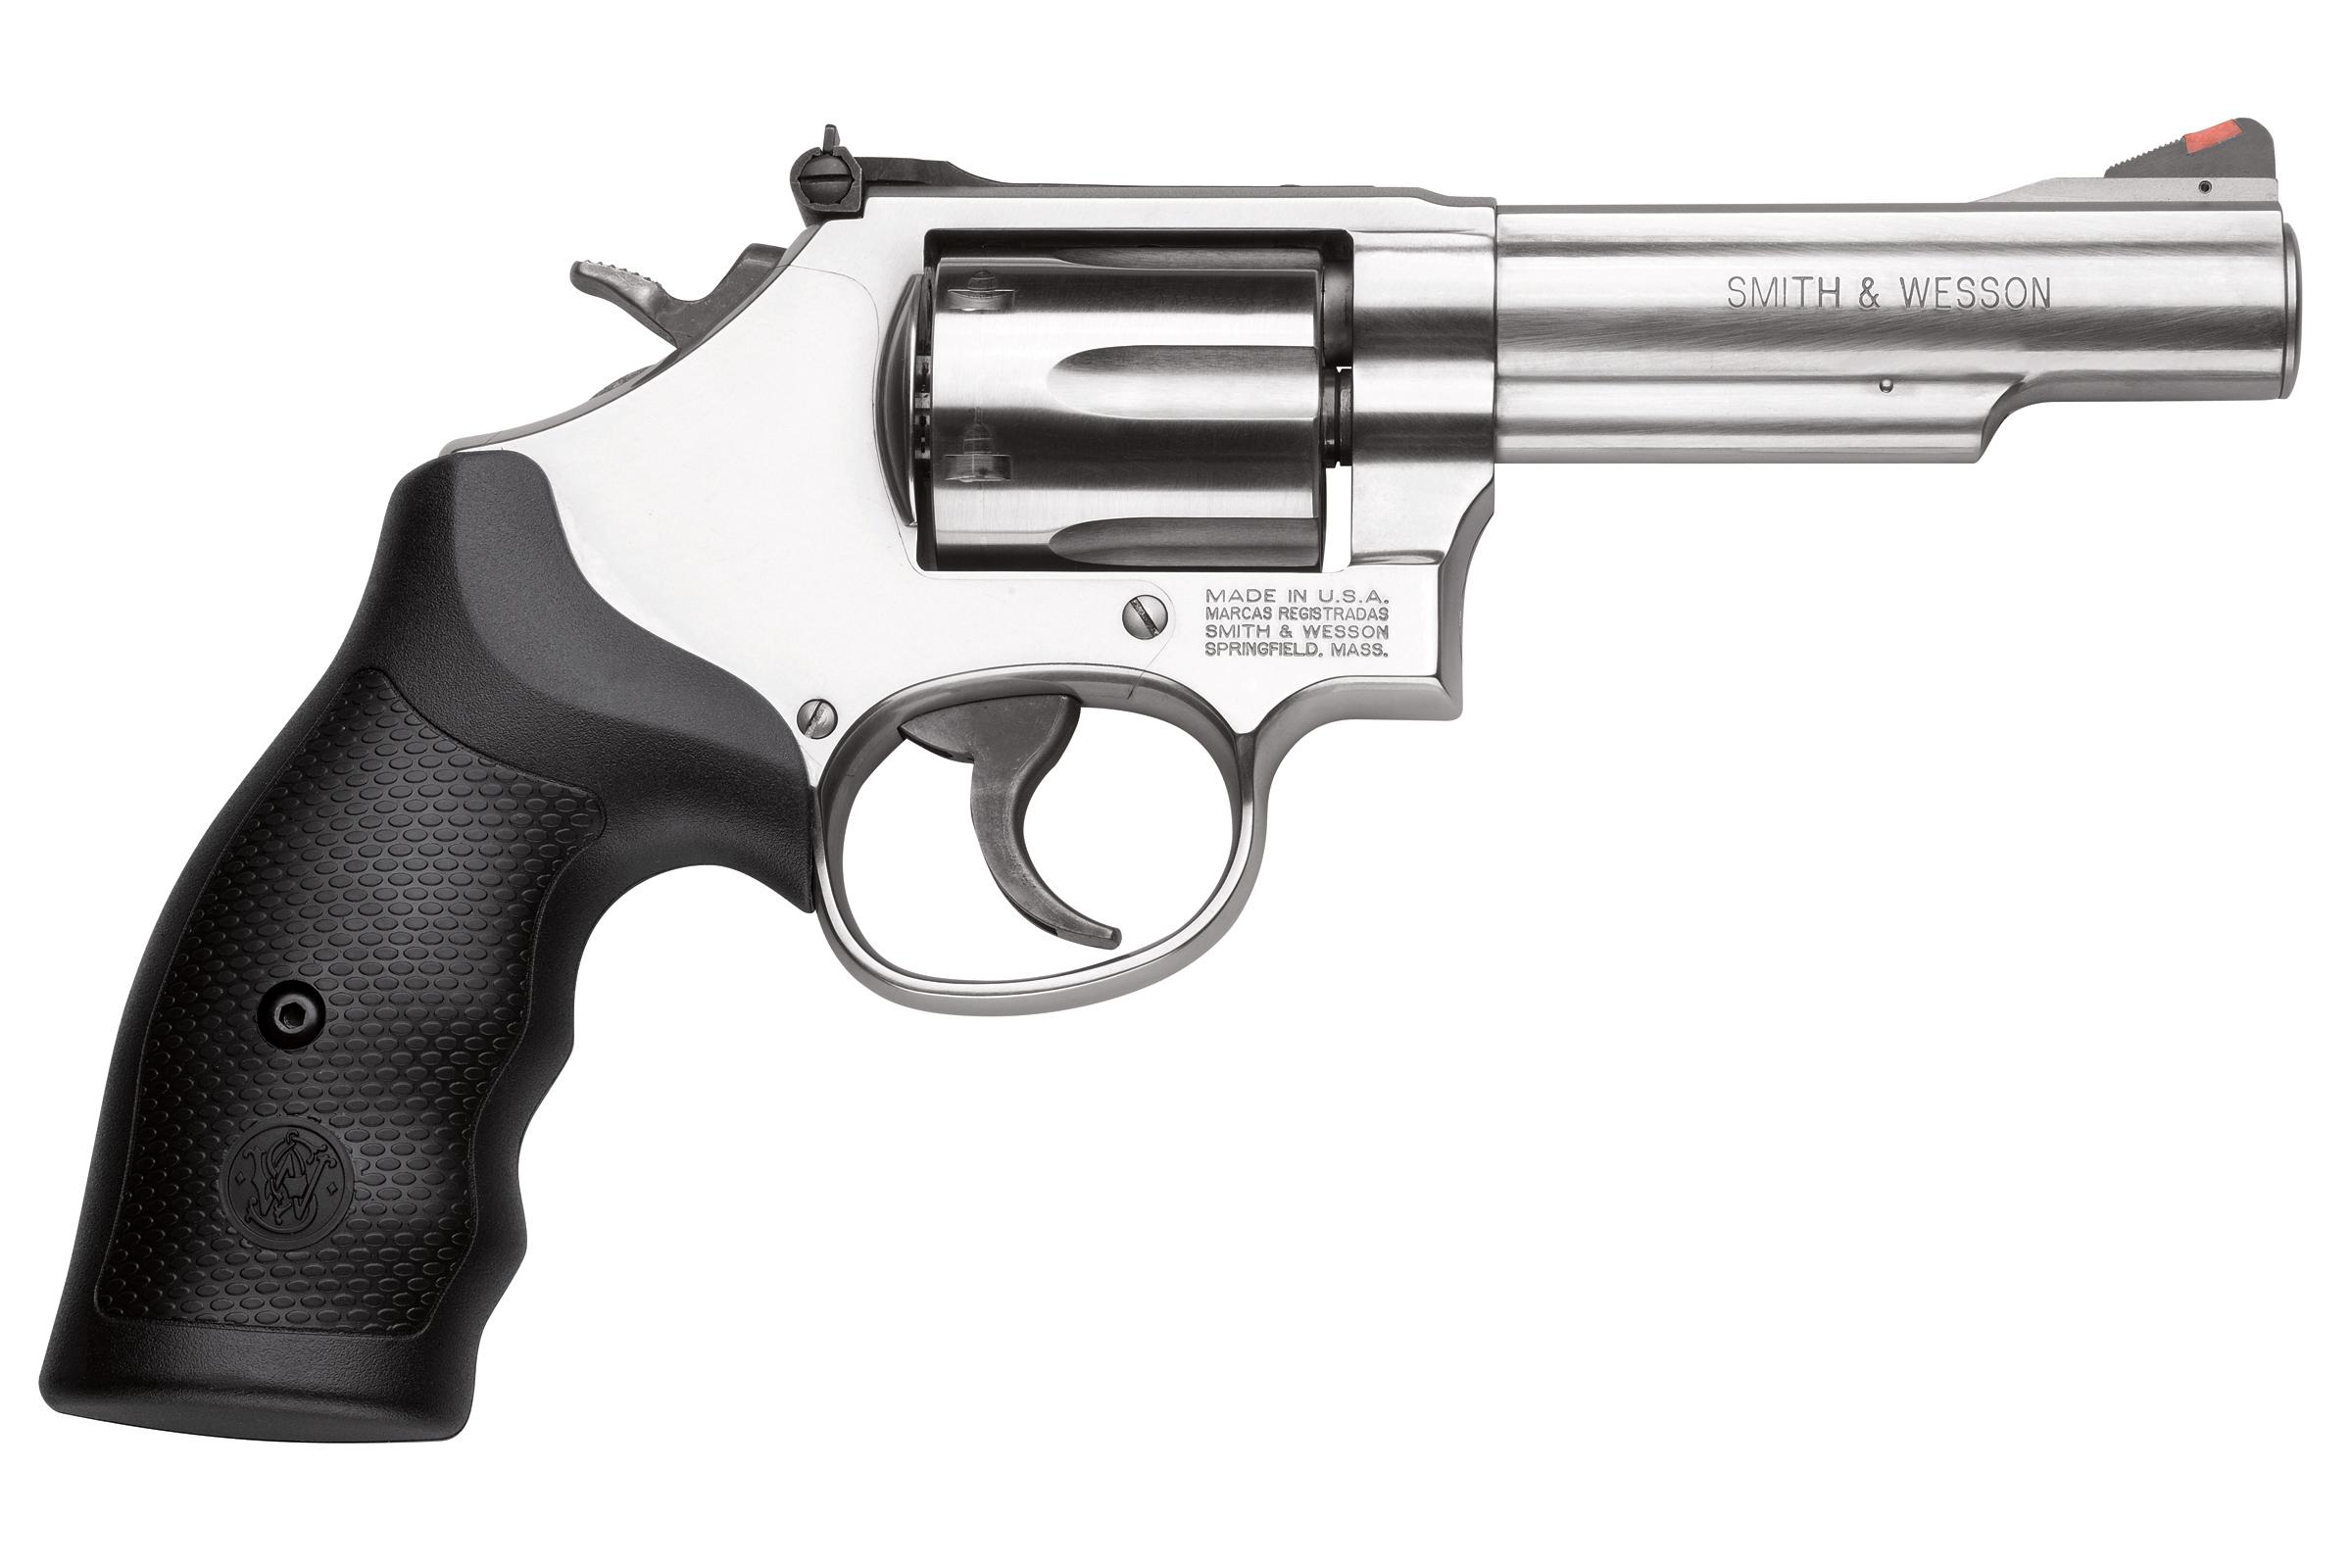  Smith & Wesson 67 4 